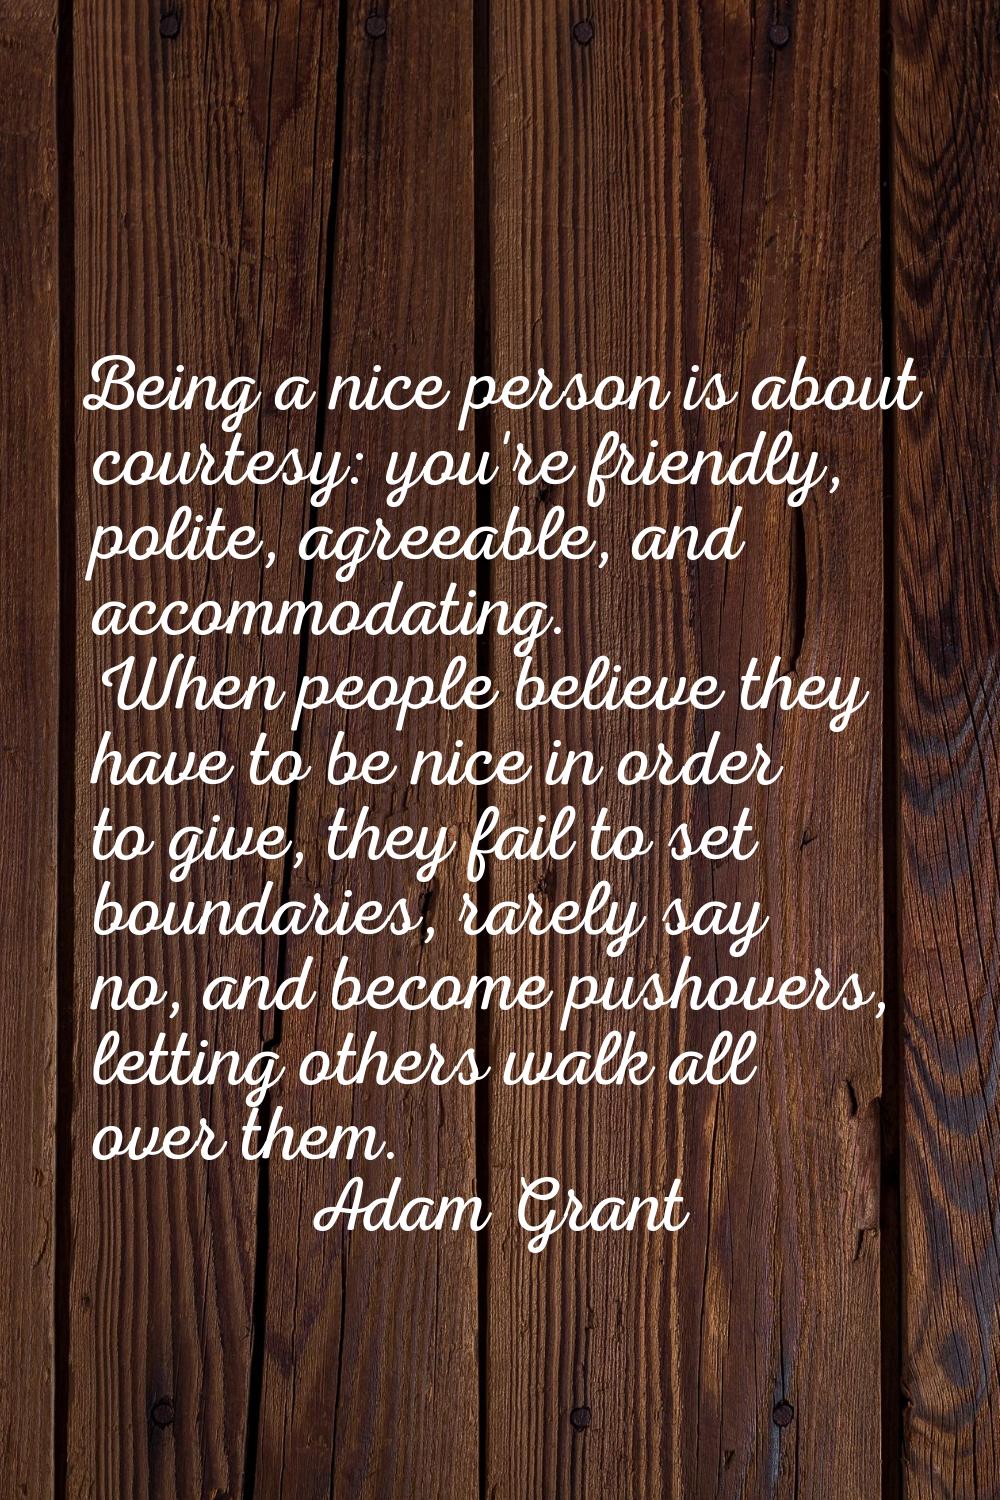 Being a nice person is about courtesy: you're friendly, polite, agreeable, and accommodating. When 